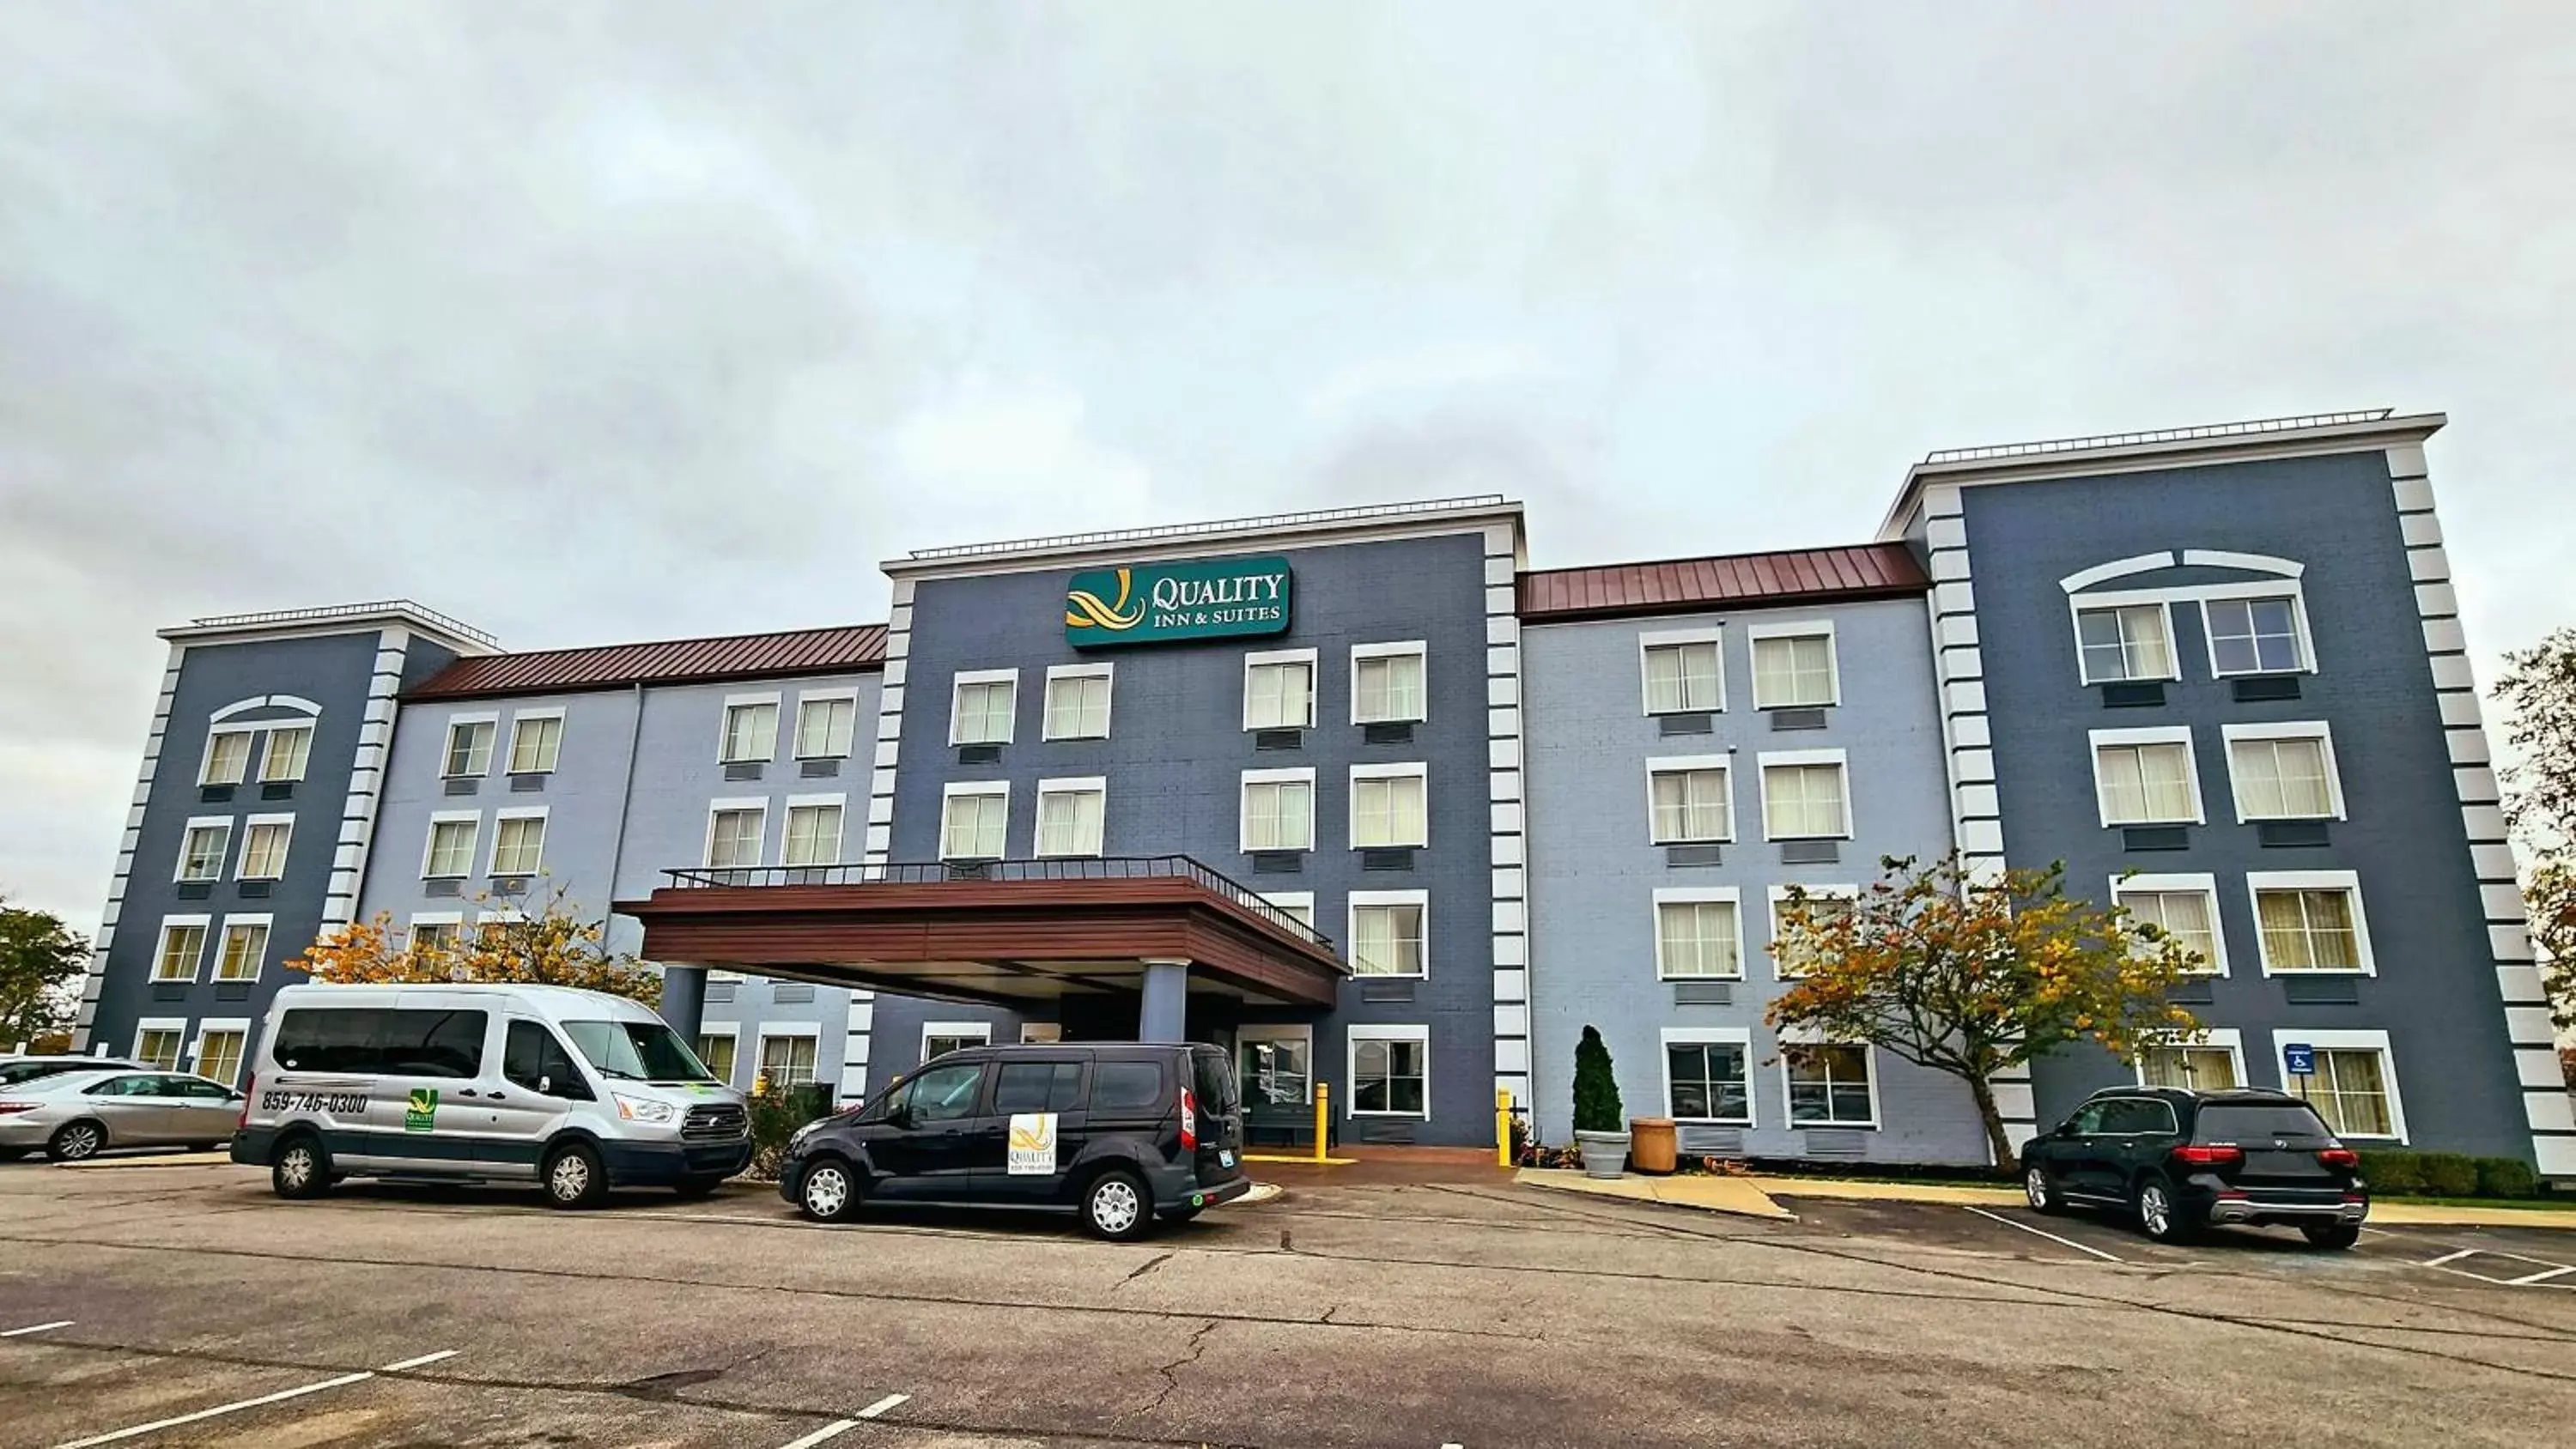 Property Building in Quality Inn & Suites CVG Airport